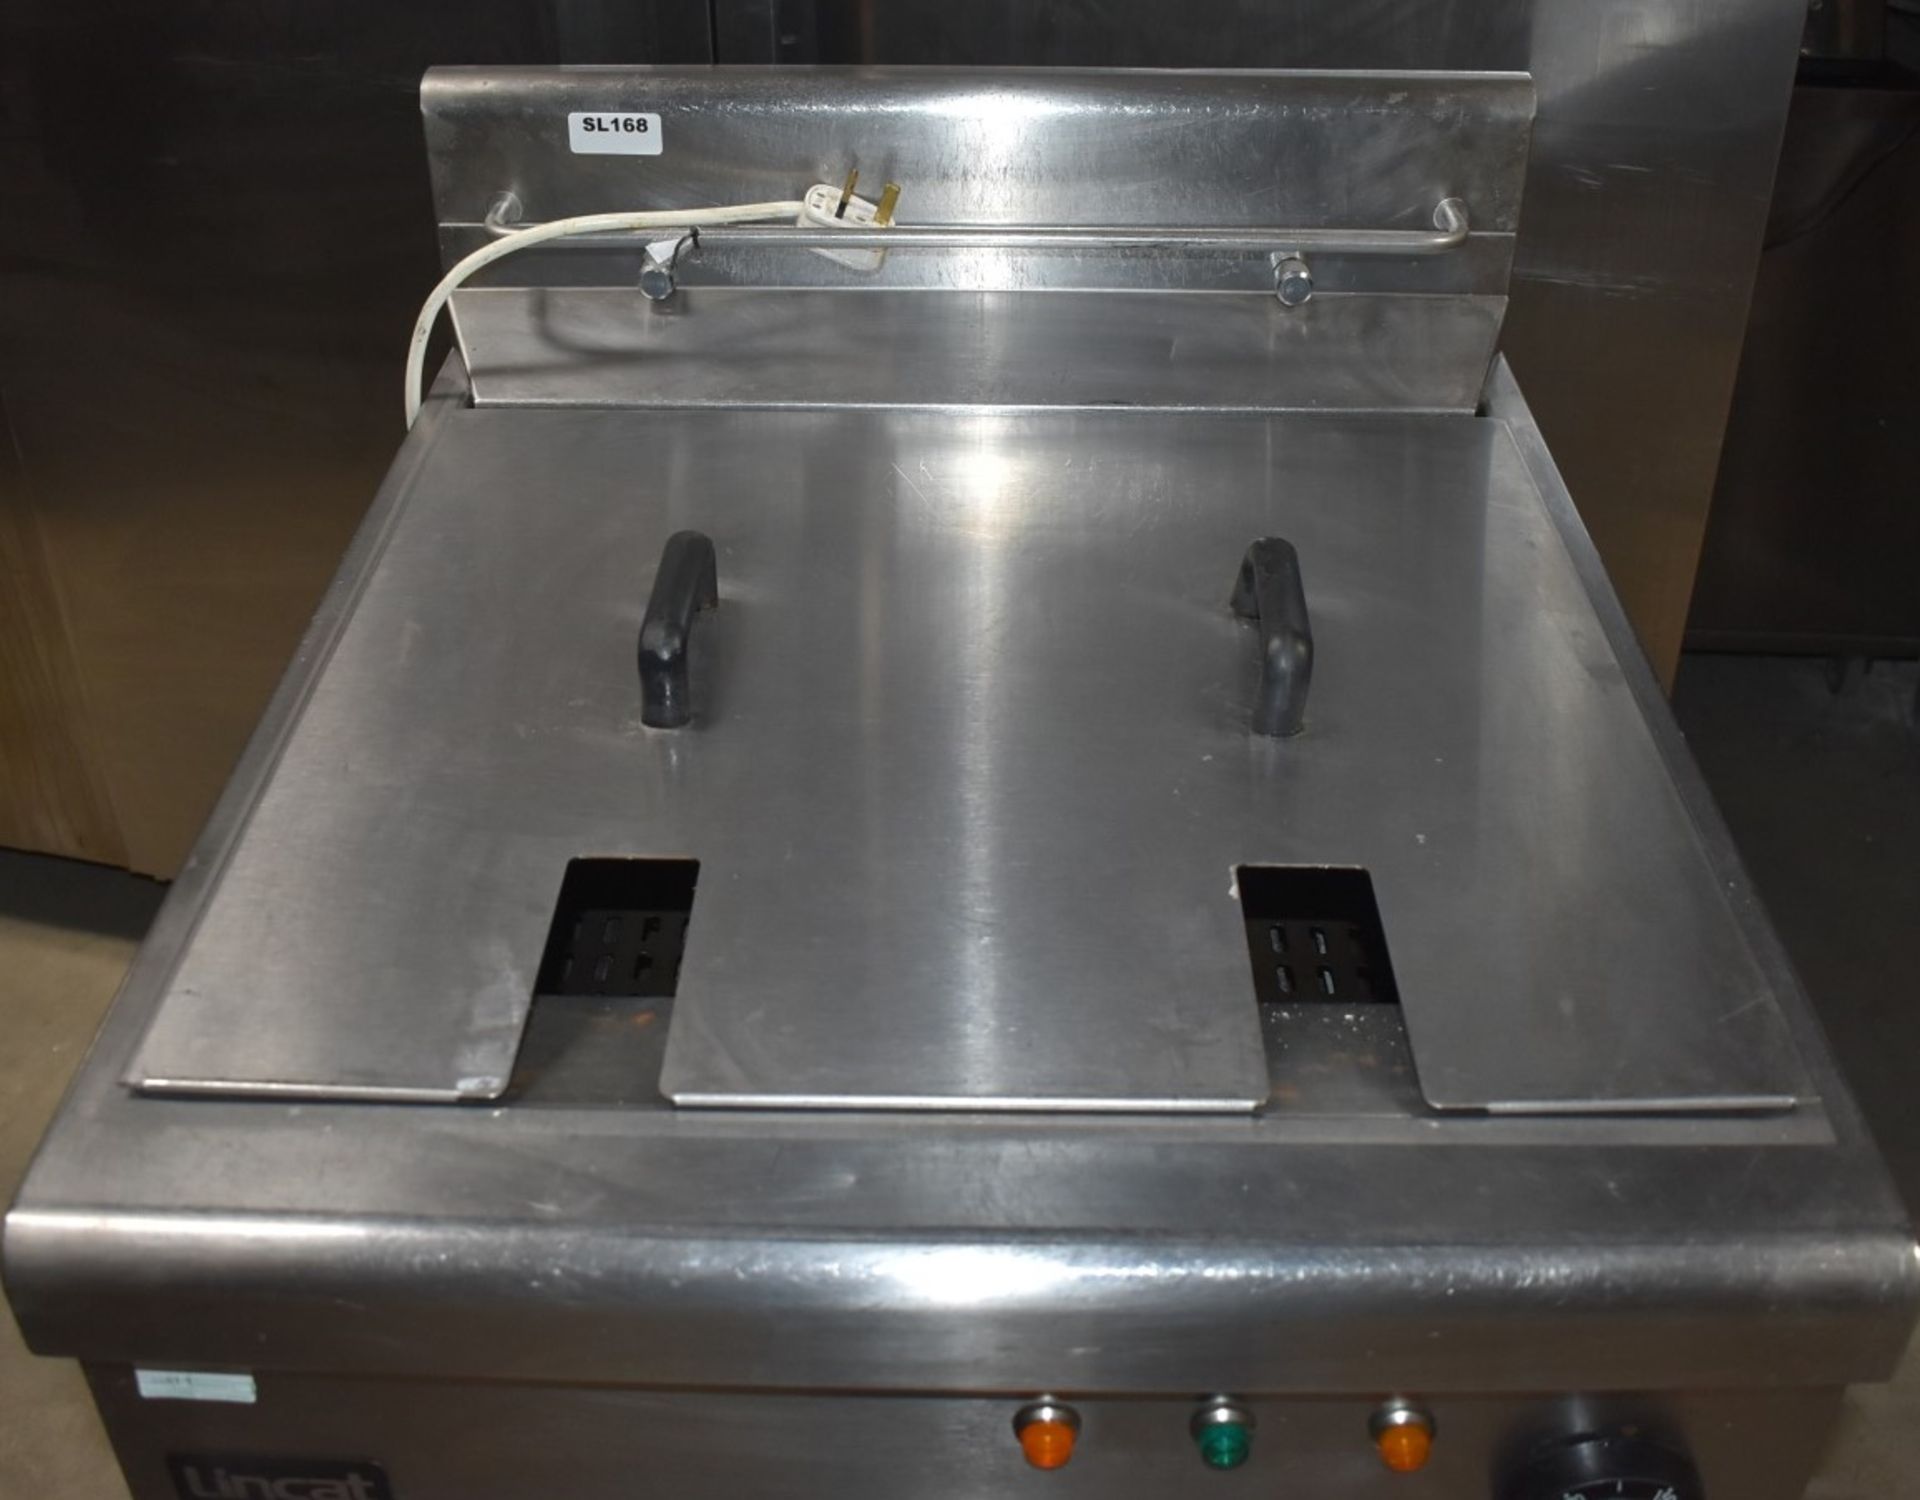 1 x Lincat Opus 700 Single Tank Electric Fryer With Built In Filtration - 3 Phase - Image 3 of 15